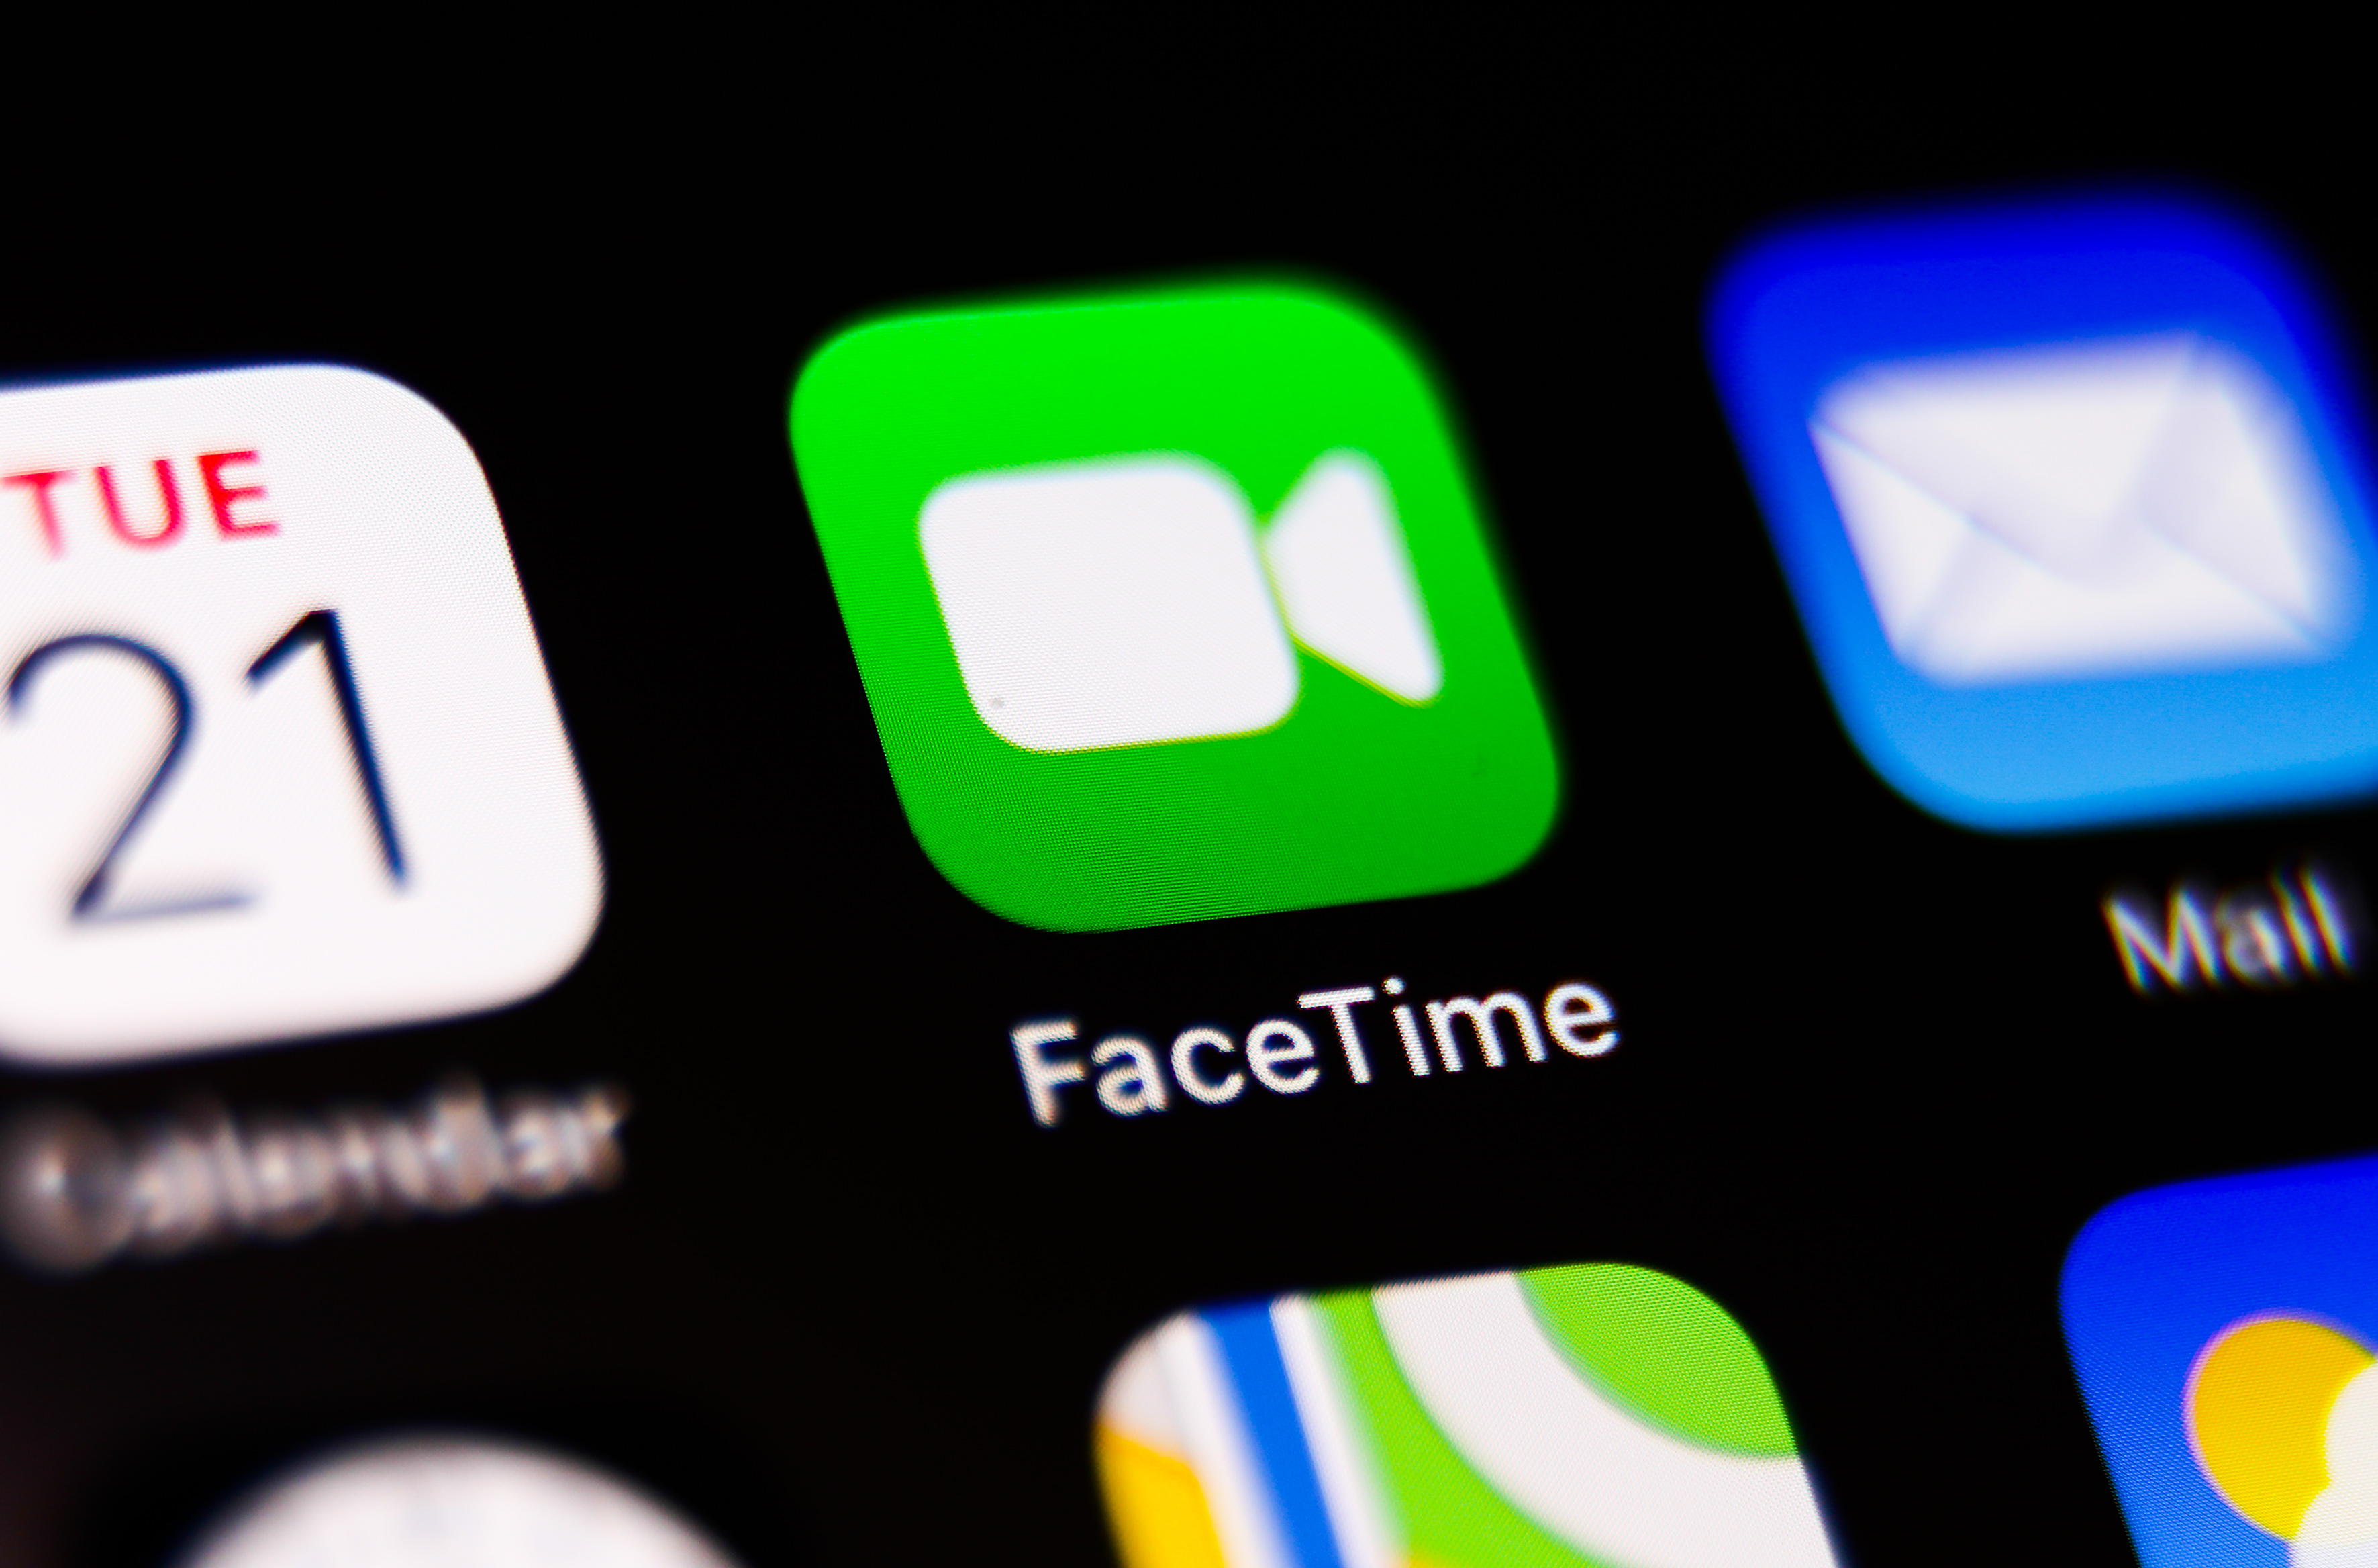 FaceTime: how to leave a voice or video message when your call goes unanswered